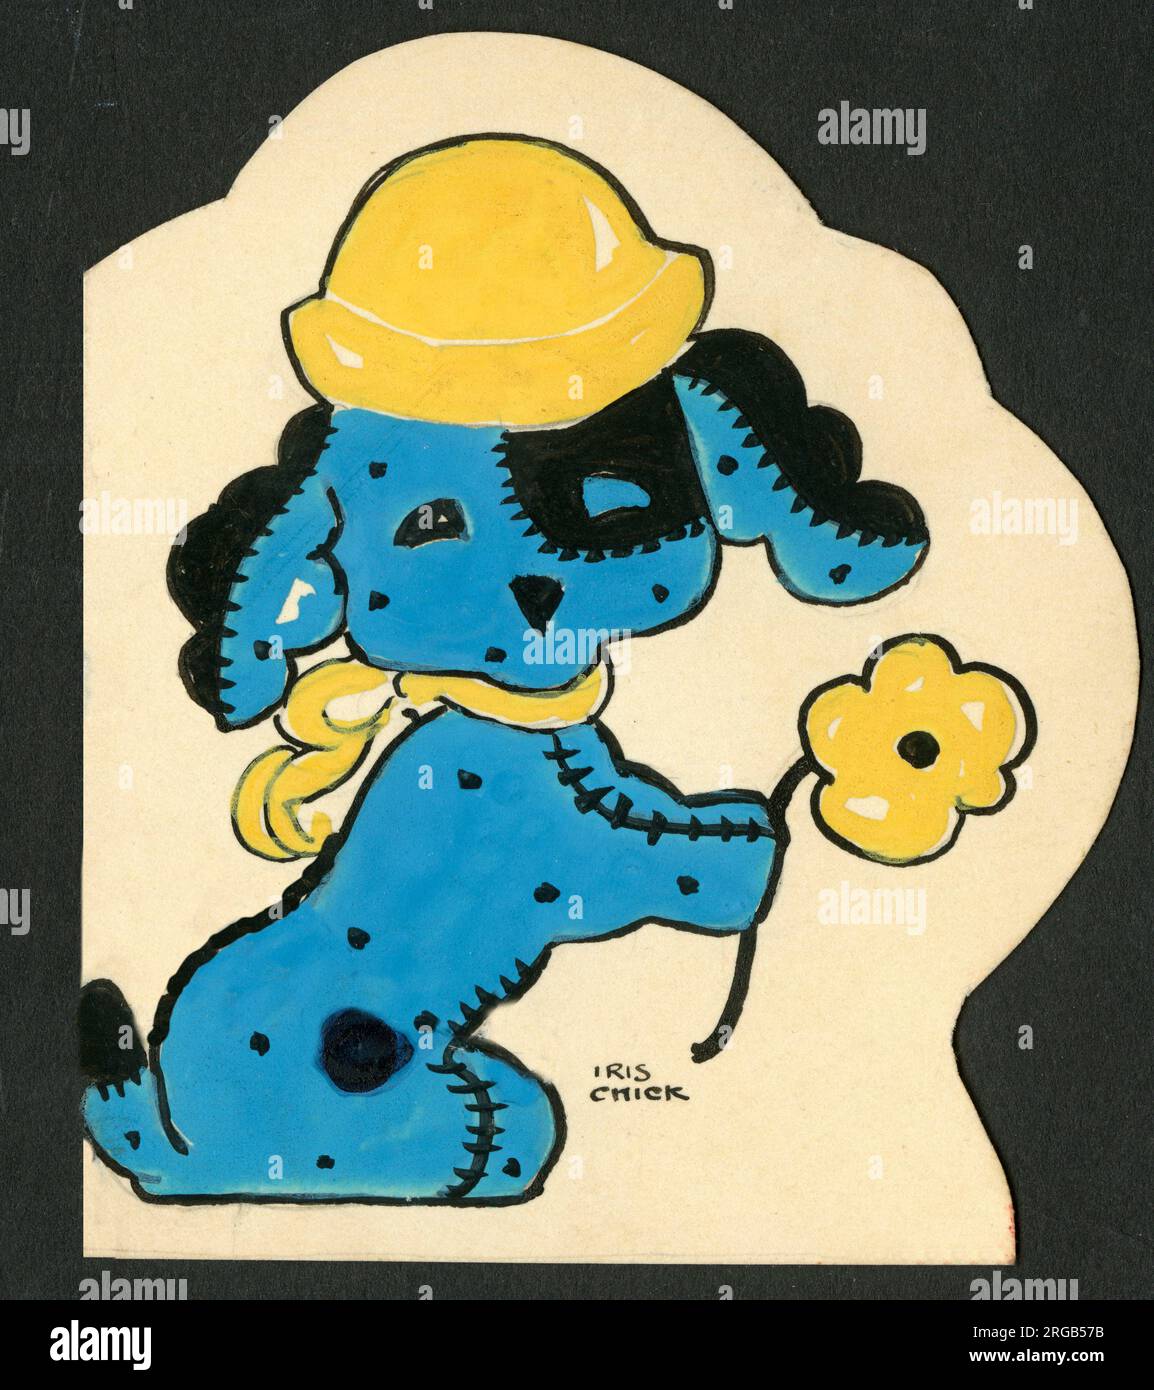 Original Artwork - little patched-up blue fabric dog, holding a yellow flower. Stock Photo